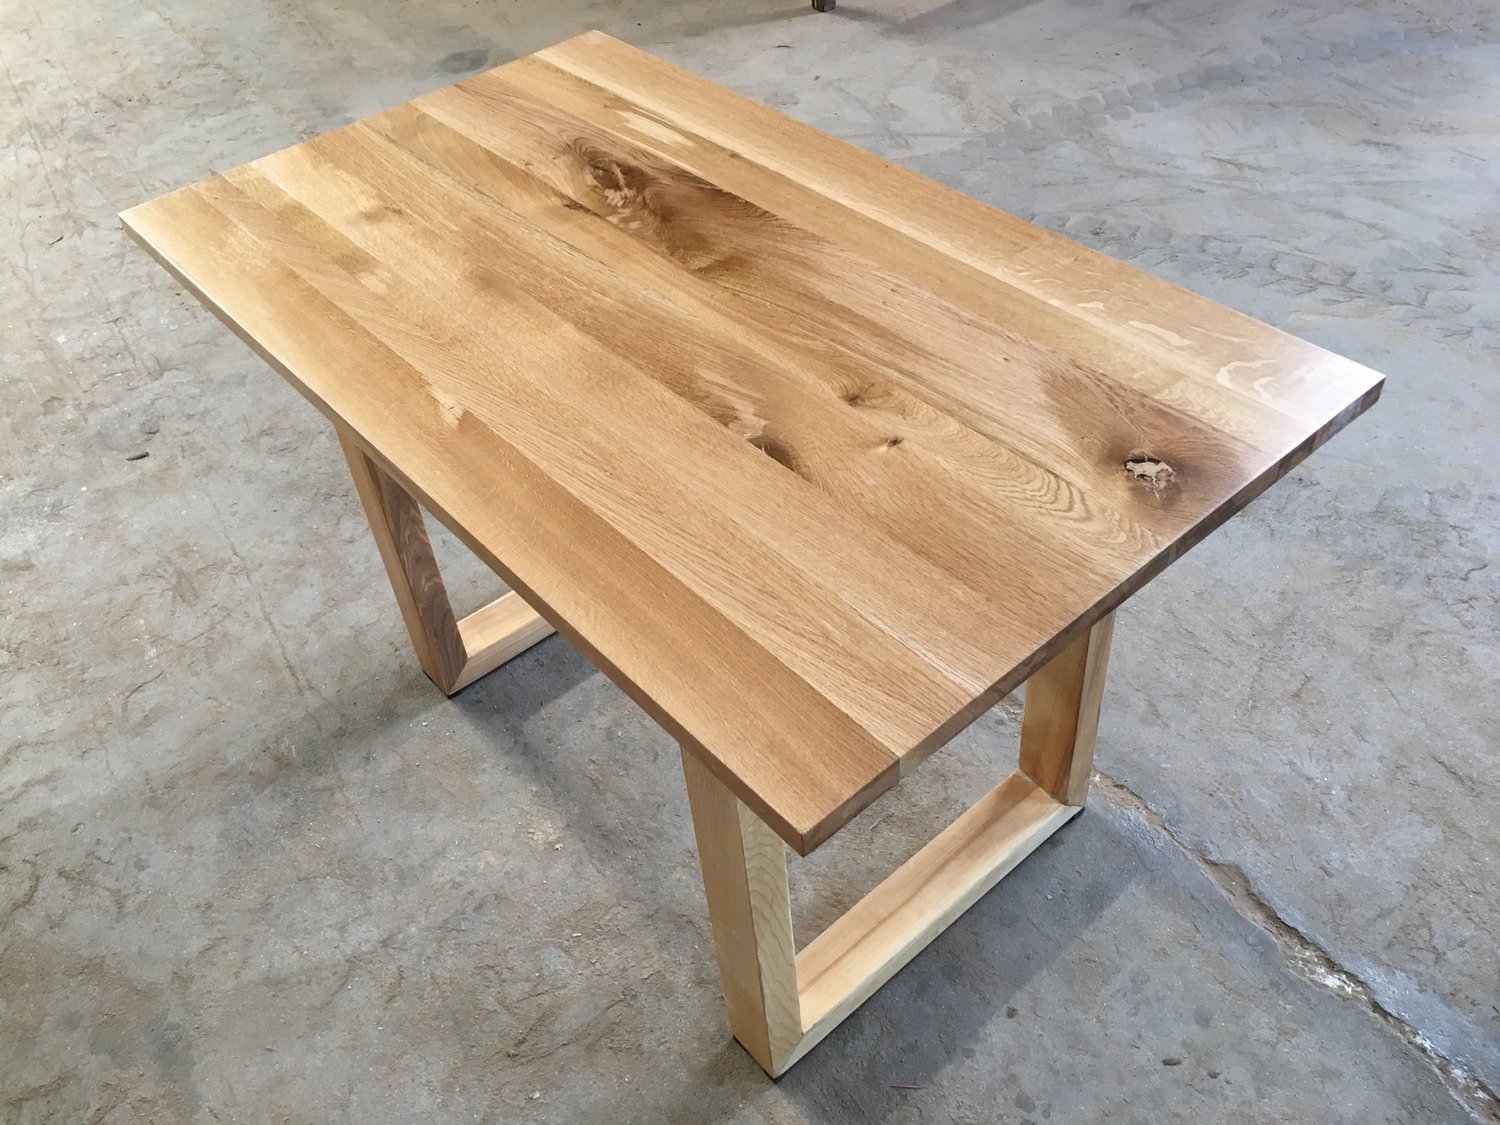 Solid wood oak table with wooden leg